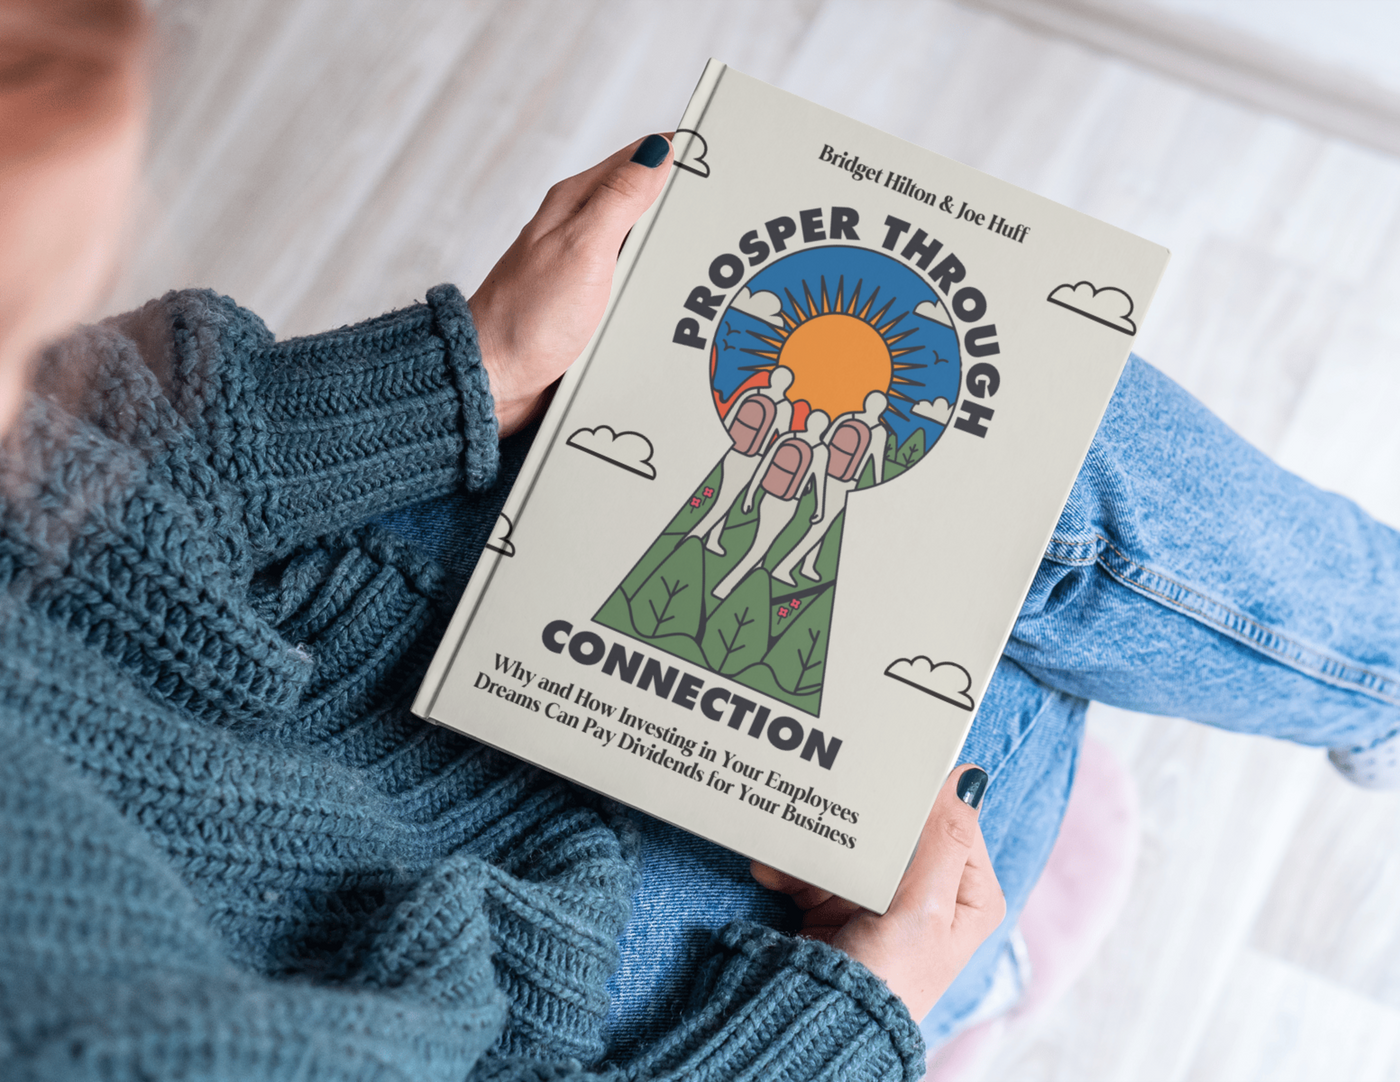 Prosper Through Connection: Why and How Investing in Your Employees Dreams Can Pay Dividends for Your Business